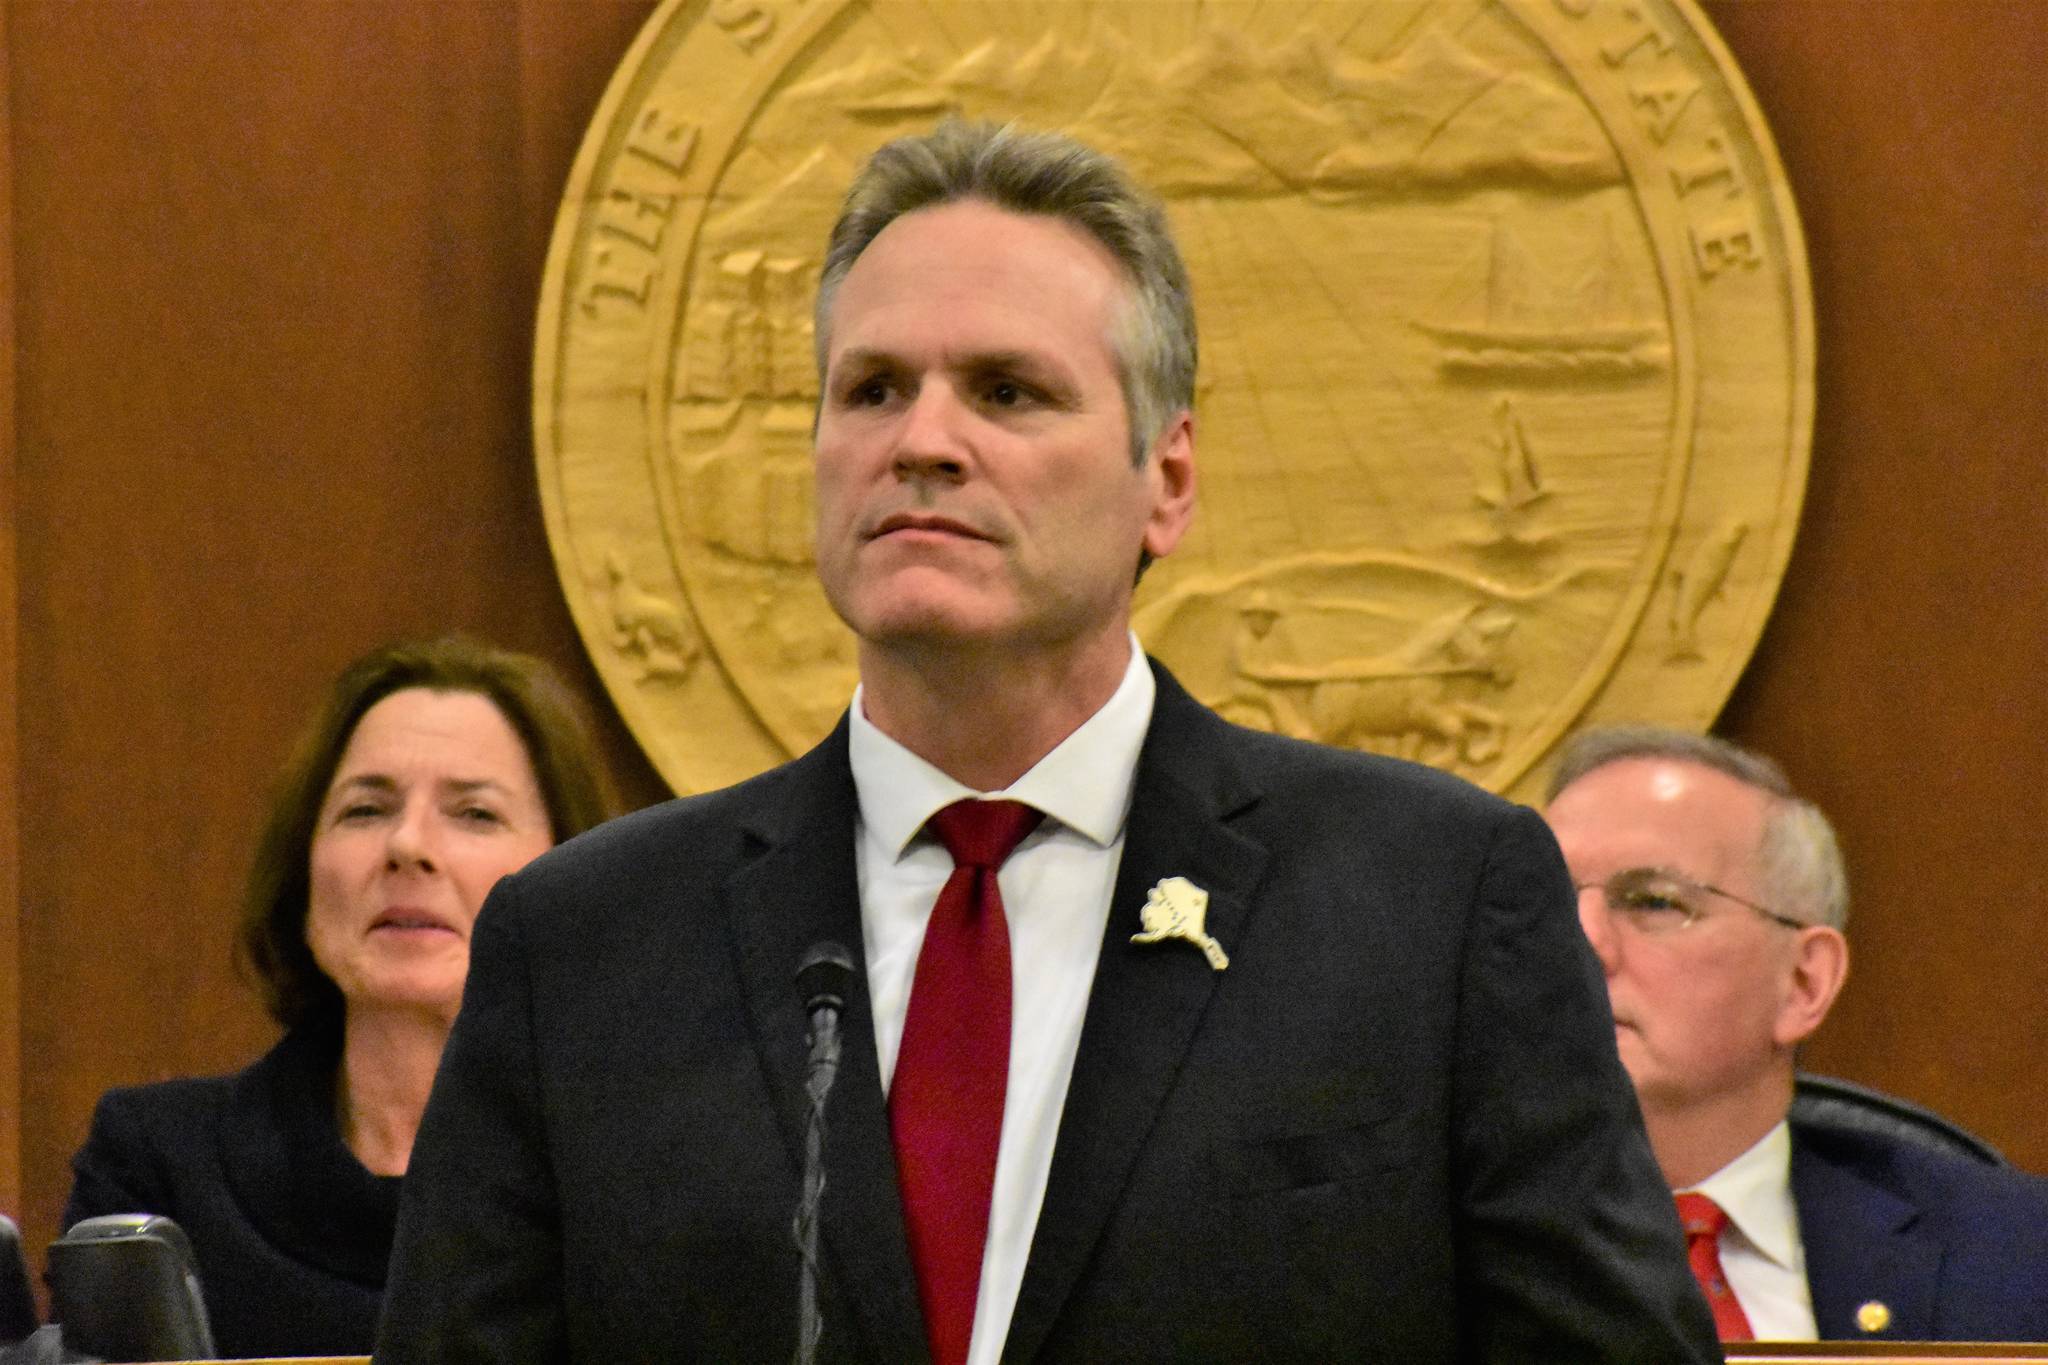 Gov. Mike Dunleavy, seen here giving his 2020 State of the State address before a joint session of the Alaska Legislature on Monday, Jan. 27, 2020, announced this year’s address would be virtual due to the pandemic. (Peter Segall / Juneau Empire File)